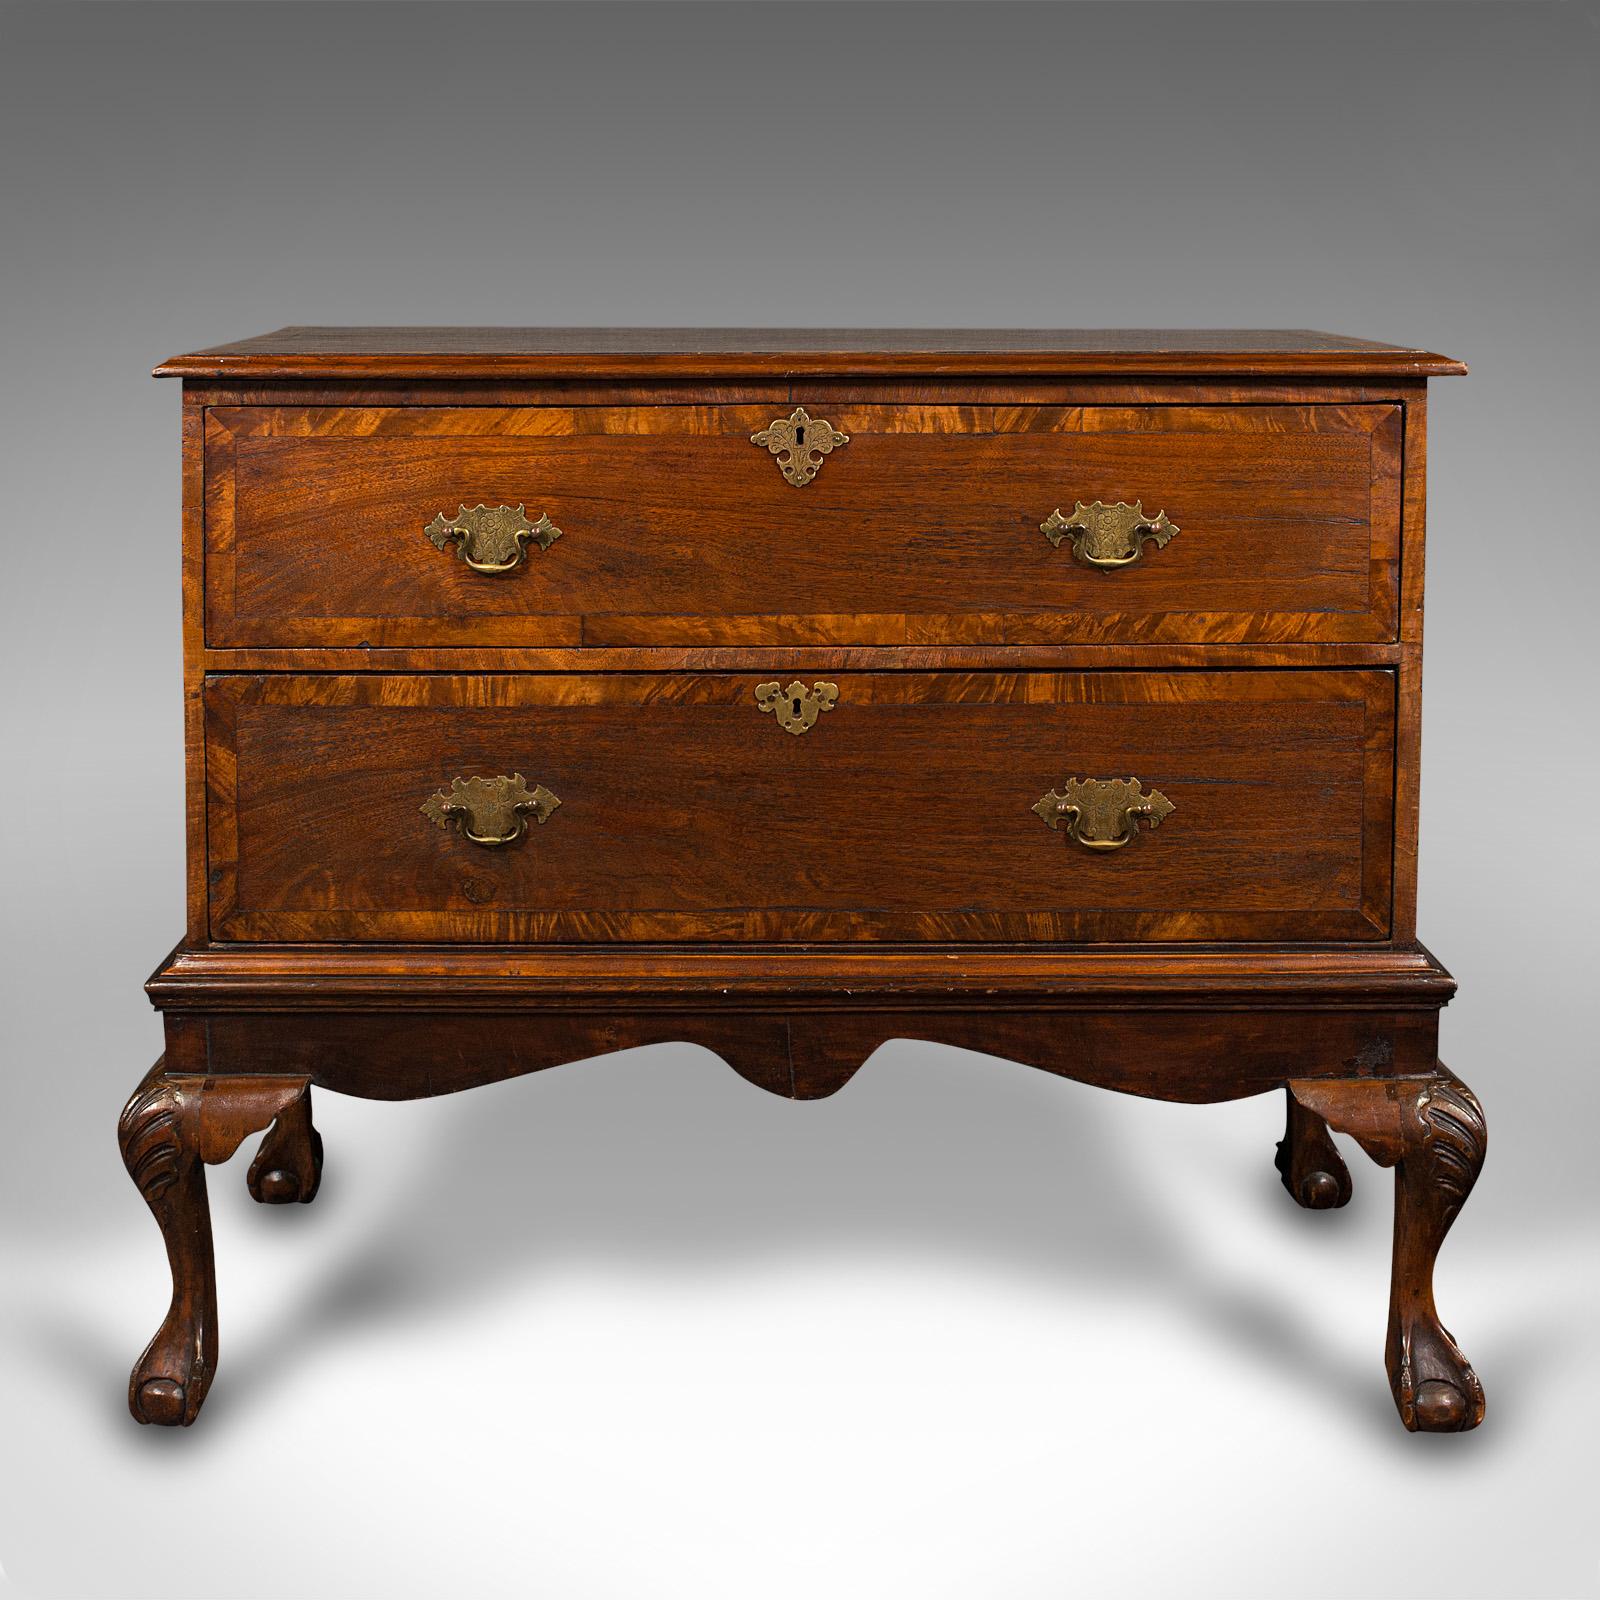 This is an antique chest on stand. An English, flame mahogany lowboy chest of drawers, dating to the Victorian period, circa 1870. 

Elegant chest of drawers with superb figuring and colour.
Displays a desirable aged patina and in good